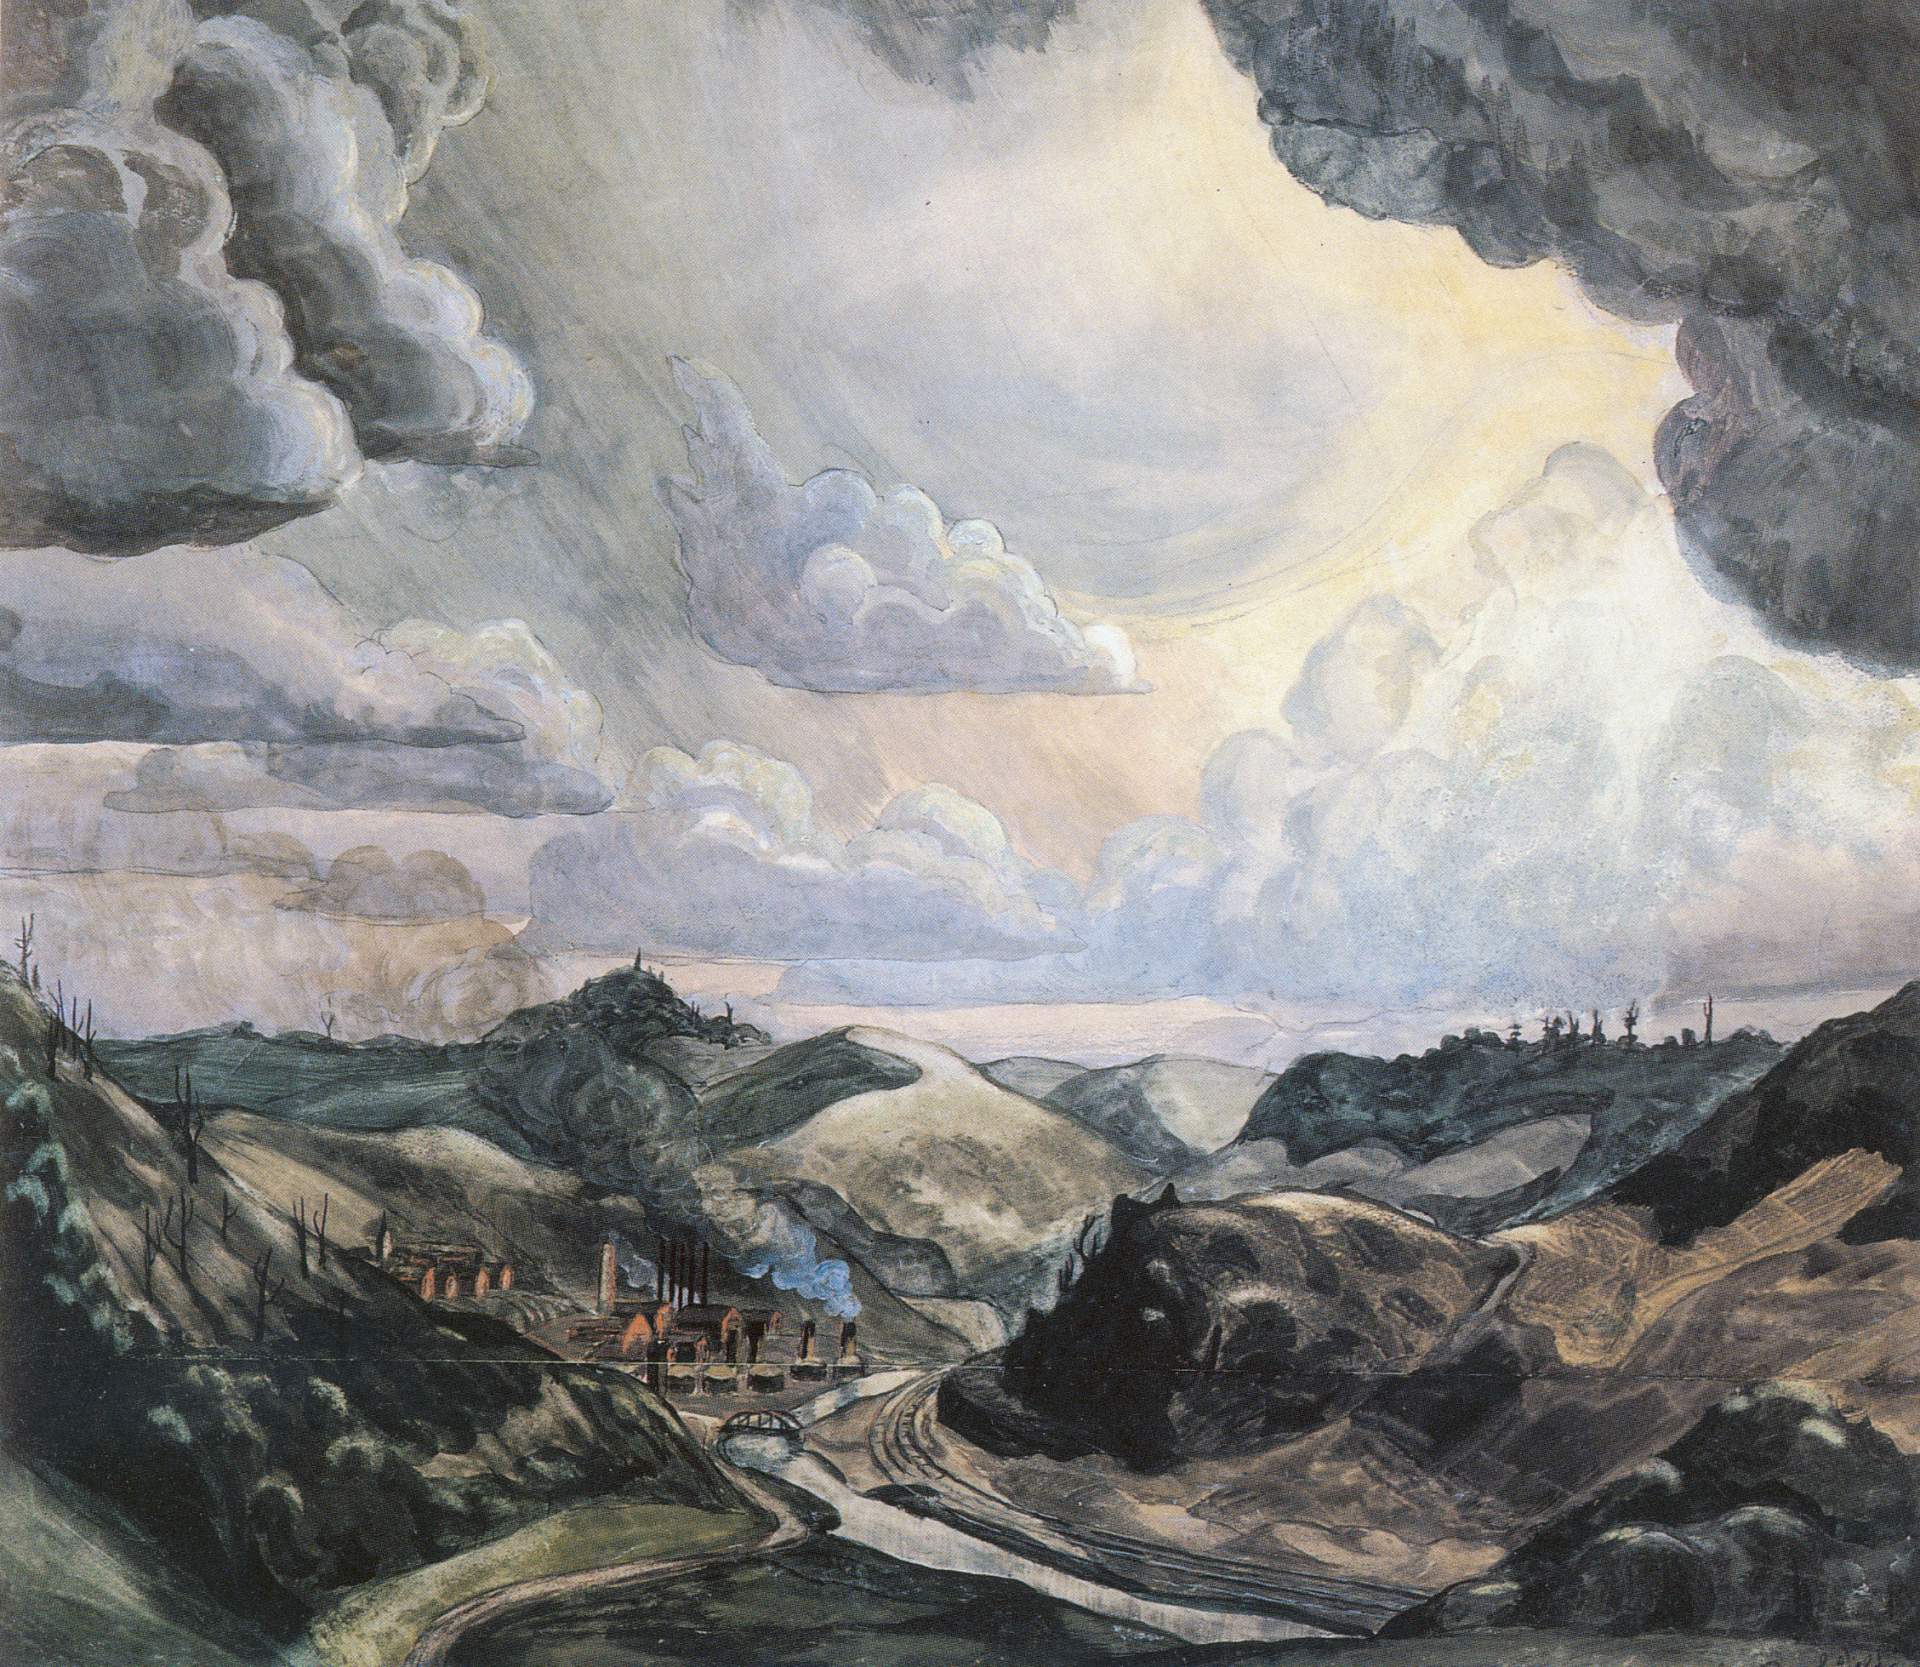 Blistering Vision: Charles E. Burchfield’s Sublime American Landscapes at the Burchfield Penney Art Center